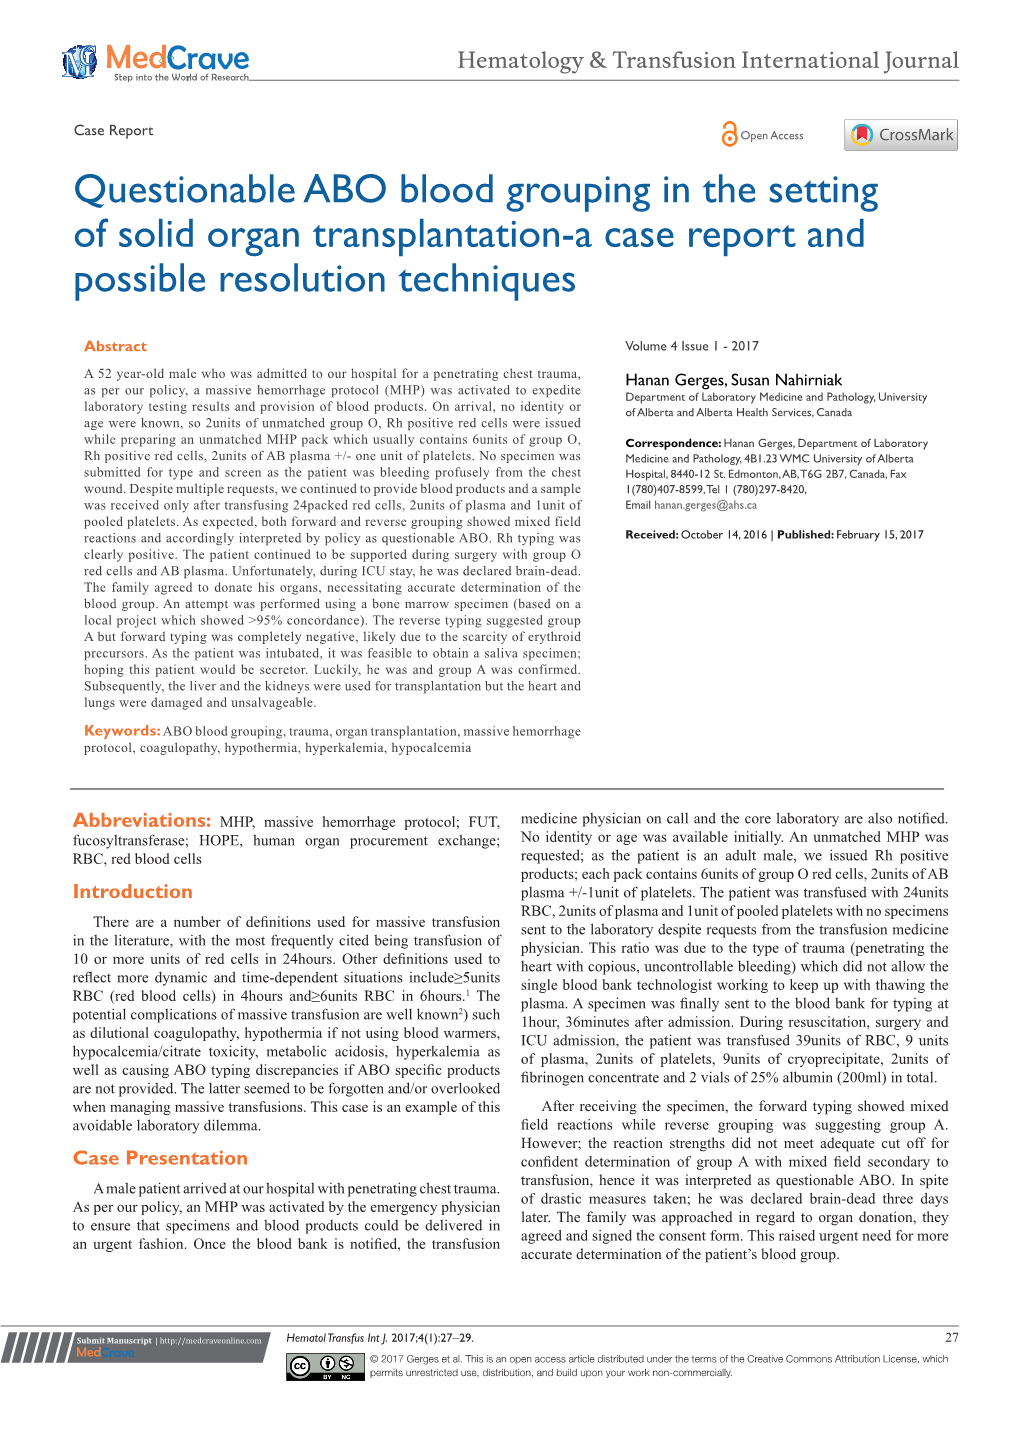 Questionable ABO Blood Grouping in the Setting of Solid Organ Transplantation-A Case Report and Possible Resolution Techniques